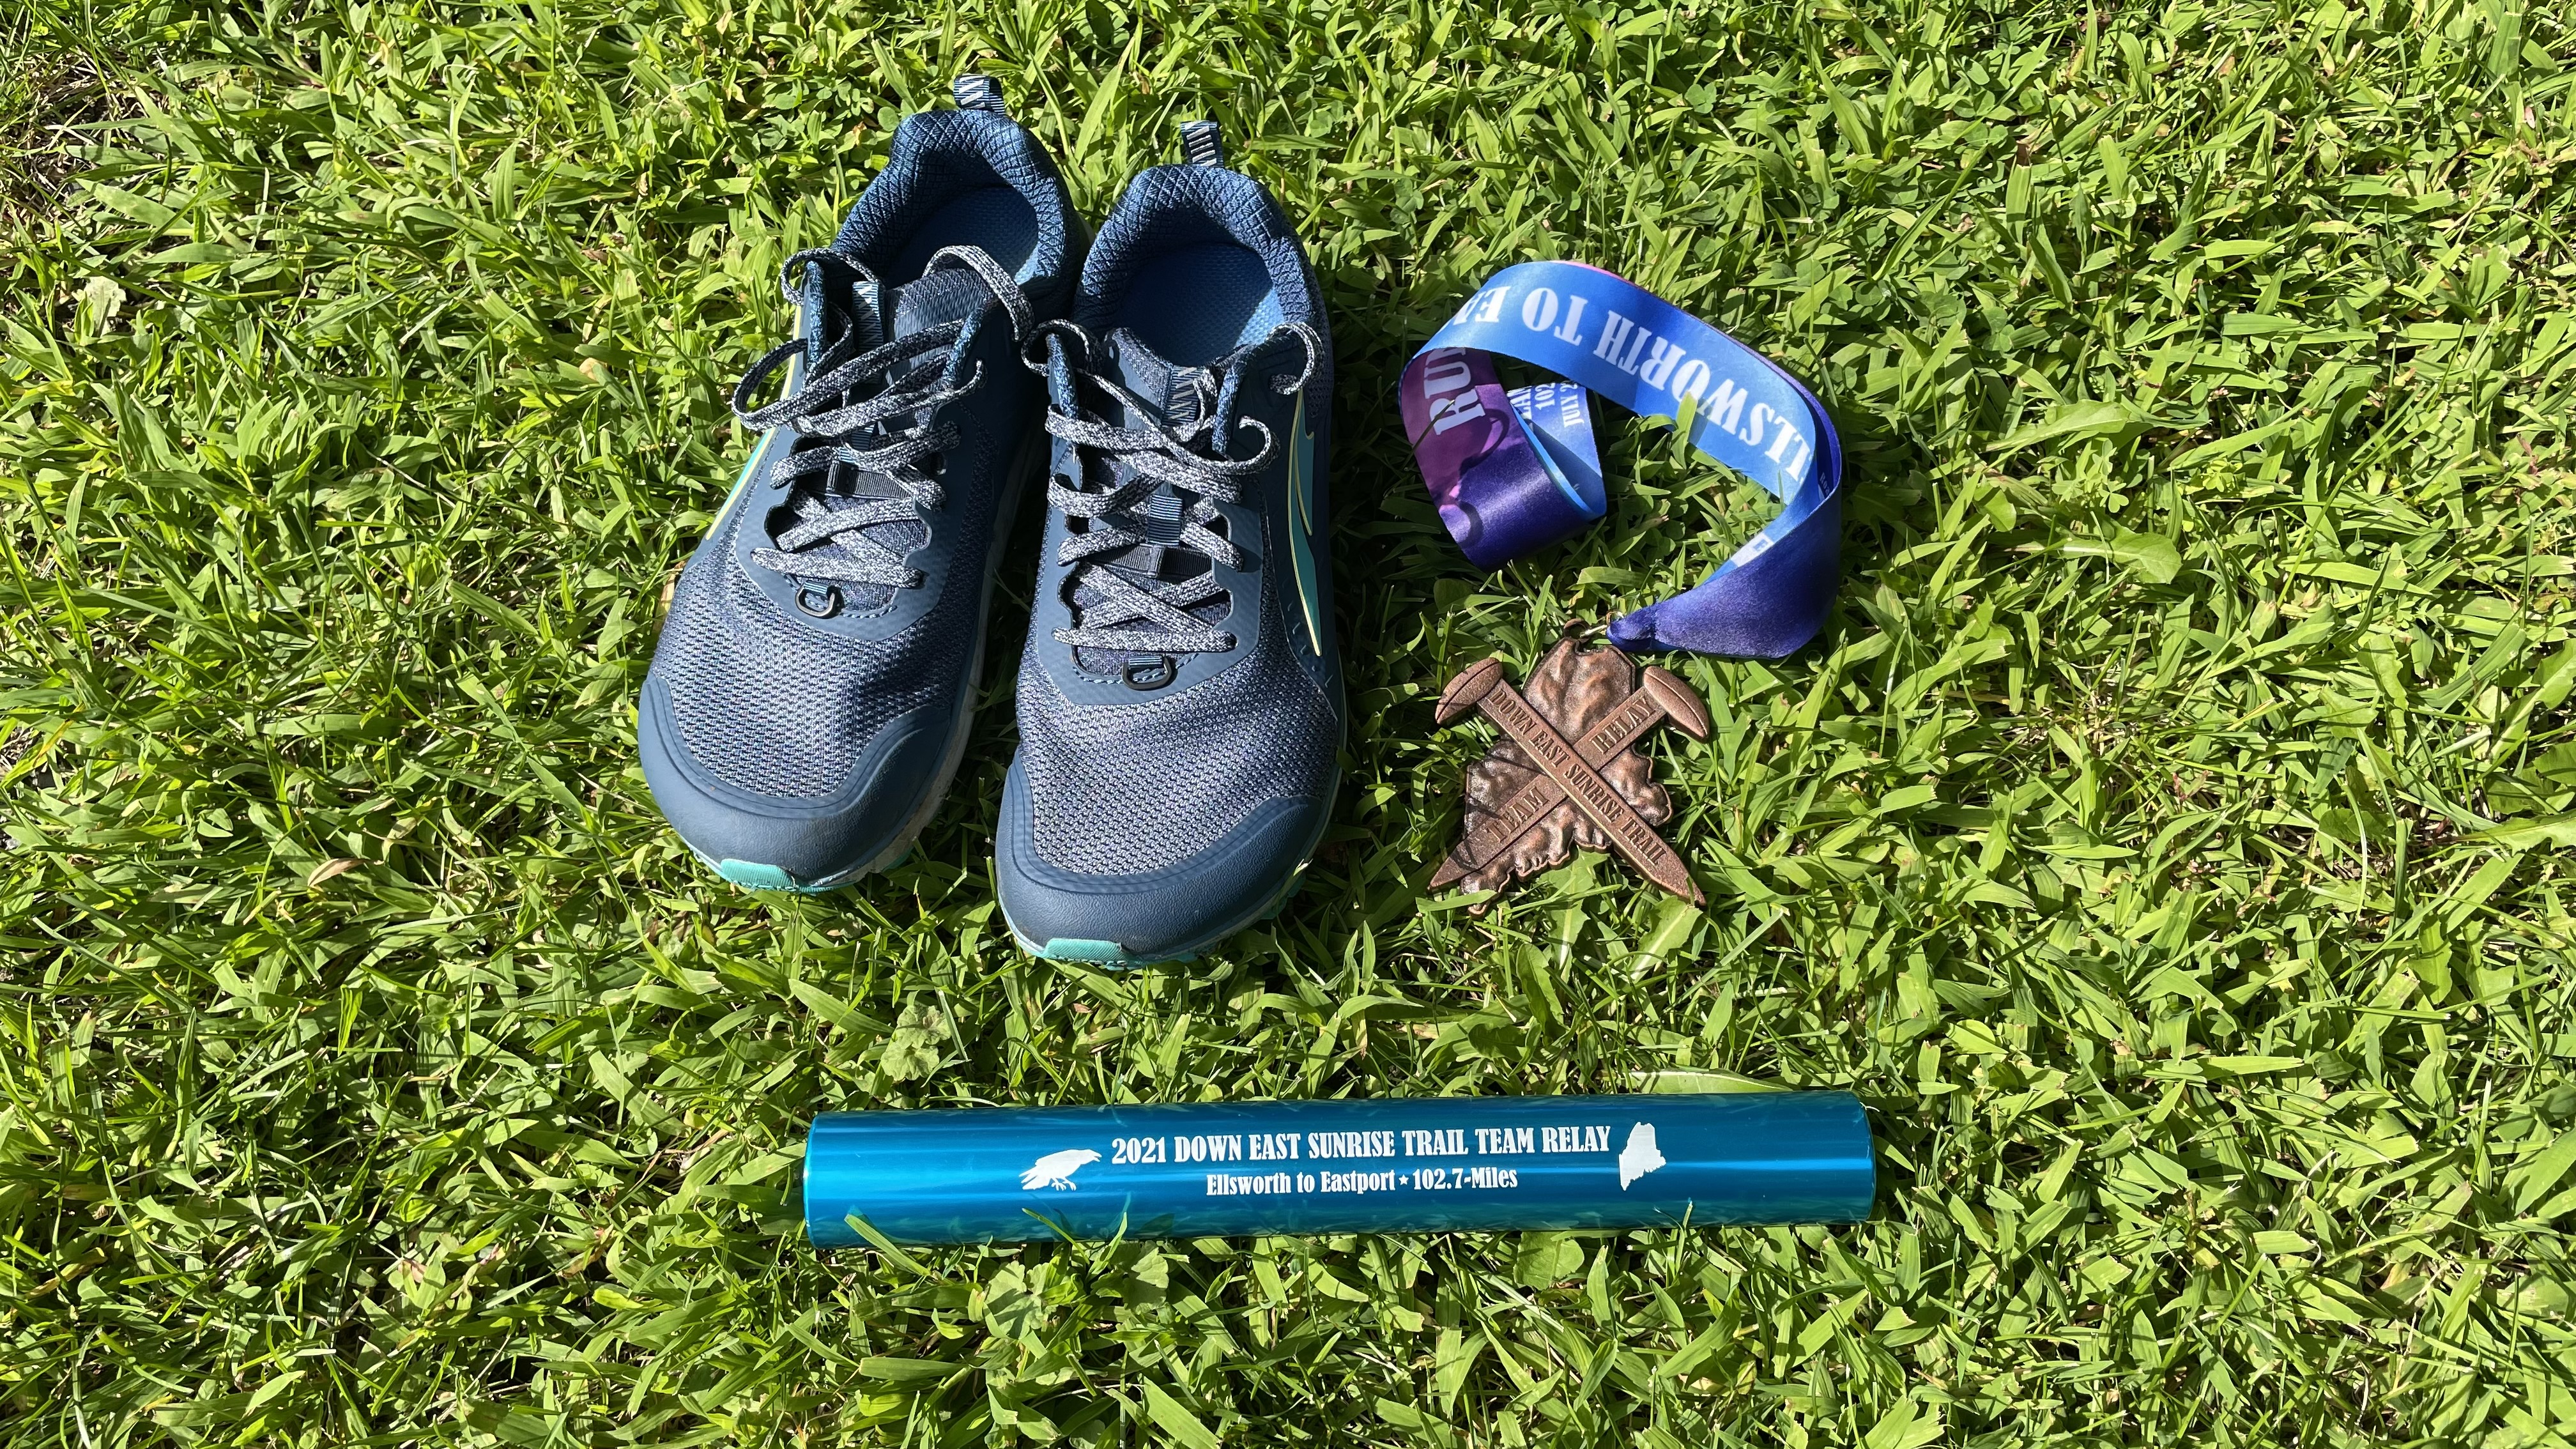 My trail runners, medal and the team's relay baton.